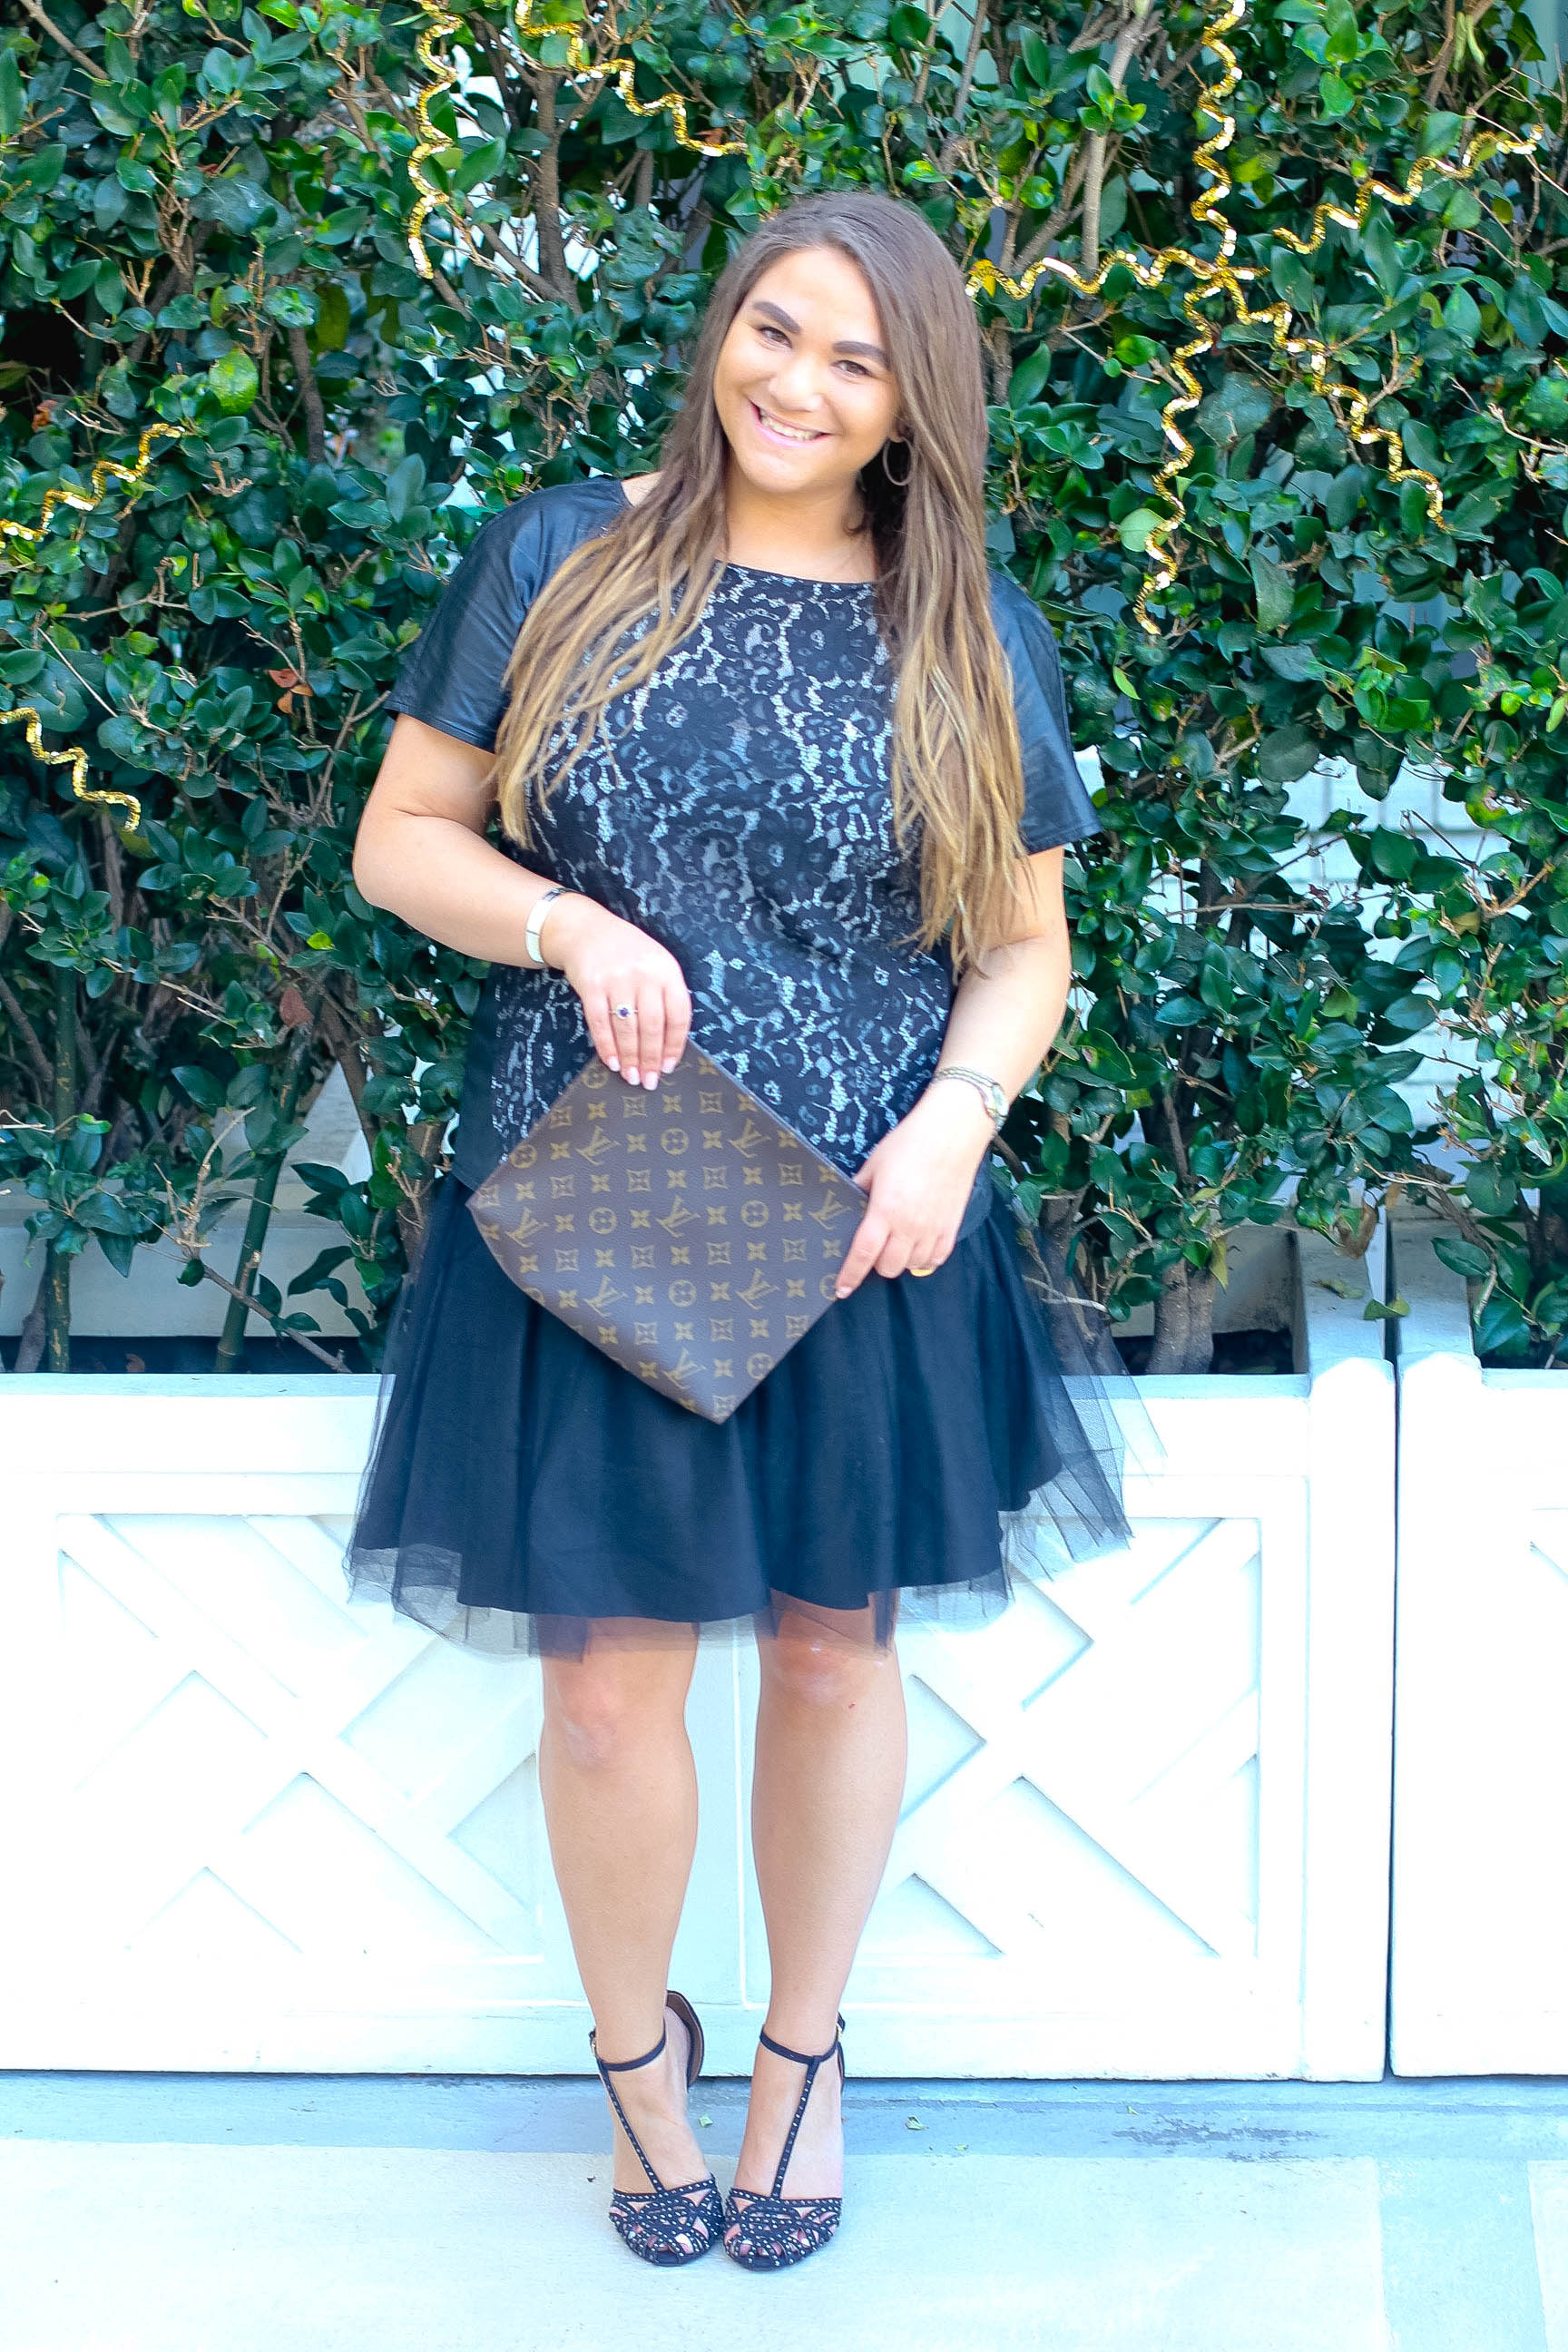 missyonmadison, melissa tierney, fashion blogger, fashion blog, fall style, holidays, holiday season, holiday dressing, what to wear for the holidays, tulle skirt, black tulle skirt, black t strap heels, black heels, holiday footwear, black floral blouse, black lace top, black faux leather top, louis vuitton toiletry pouch, louis vuitton toiletry pouch 26, la blogger, la style, what to wear for the holidays, beverly hills, beverly wilshire, rodeo drive, rodeo gives back, beverly hills holiday lighting celebration,